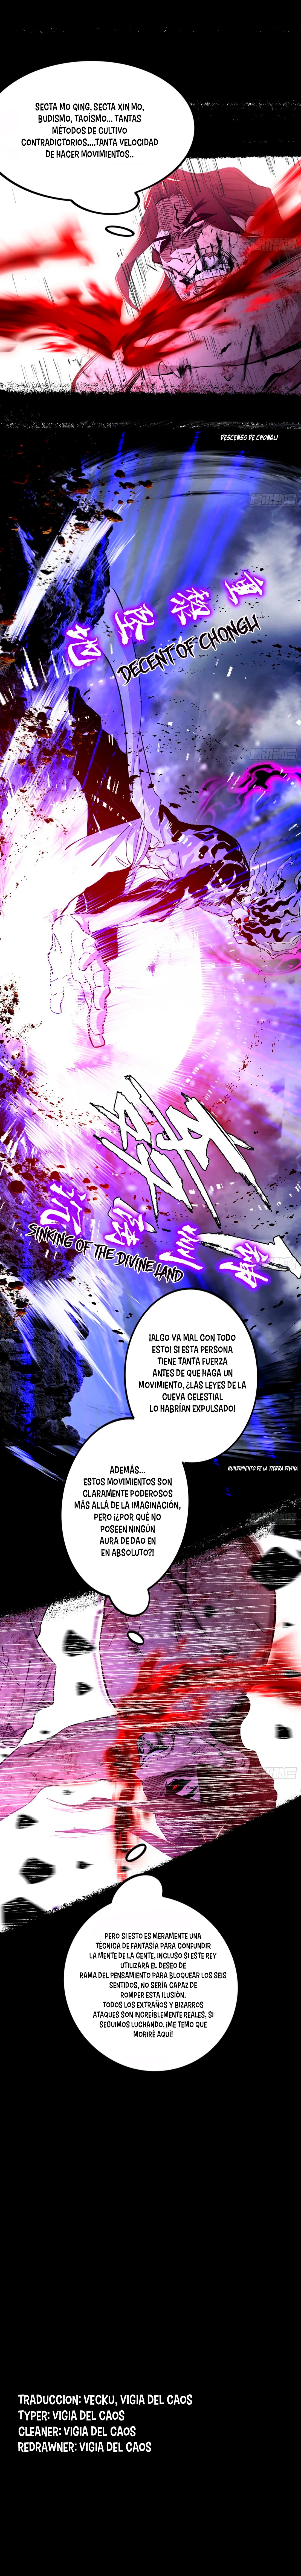 Manga Soy un dios maligno Chapter 308 image number 10